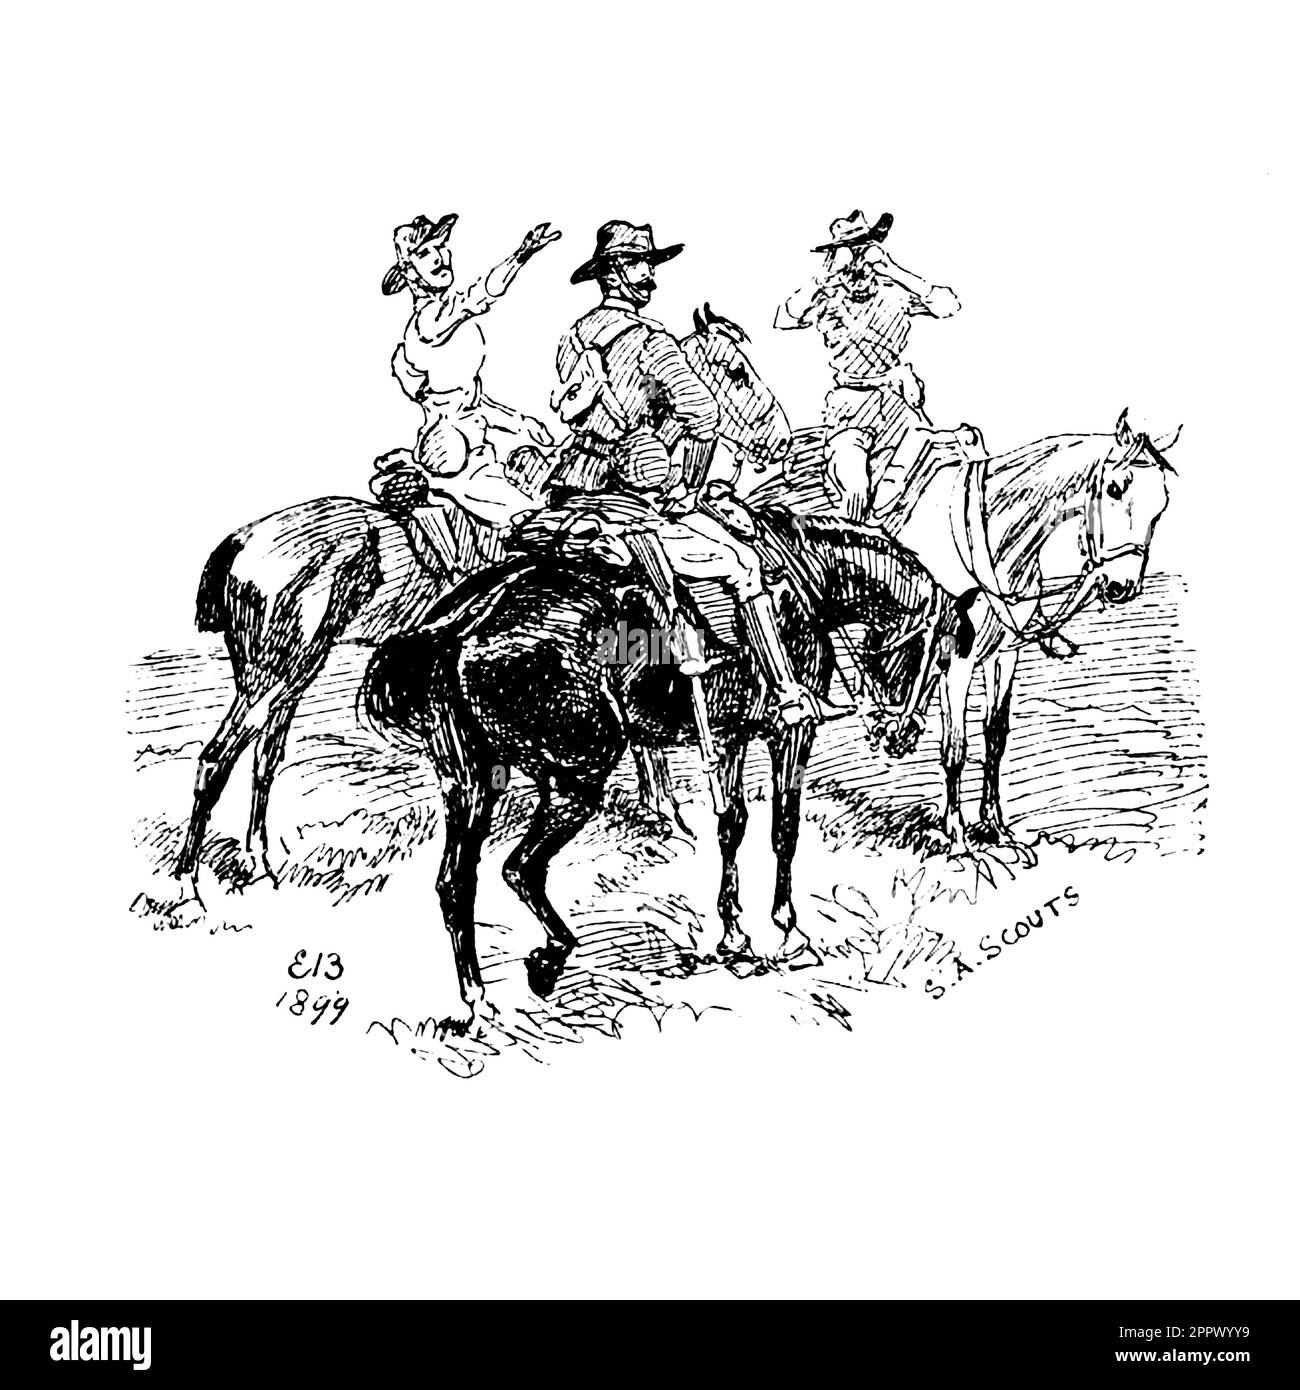 British Soldiers on Horseback from the book ' From sketch-book and diary ' by Butler, Elizabeth, Lady, 1846-1933 Publication date 1909 London : Burns & Oates Elizabeth Southerden Thompson (3 November 1846 – 2 October 1933), later known as Lady Butler, was a British painter who specialised in painting scenes from British military campaigns and battles, including the Crimean War and the Napoleonic Wars Stock Photo